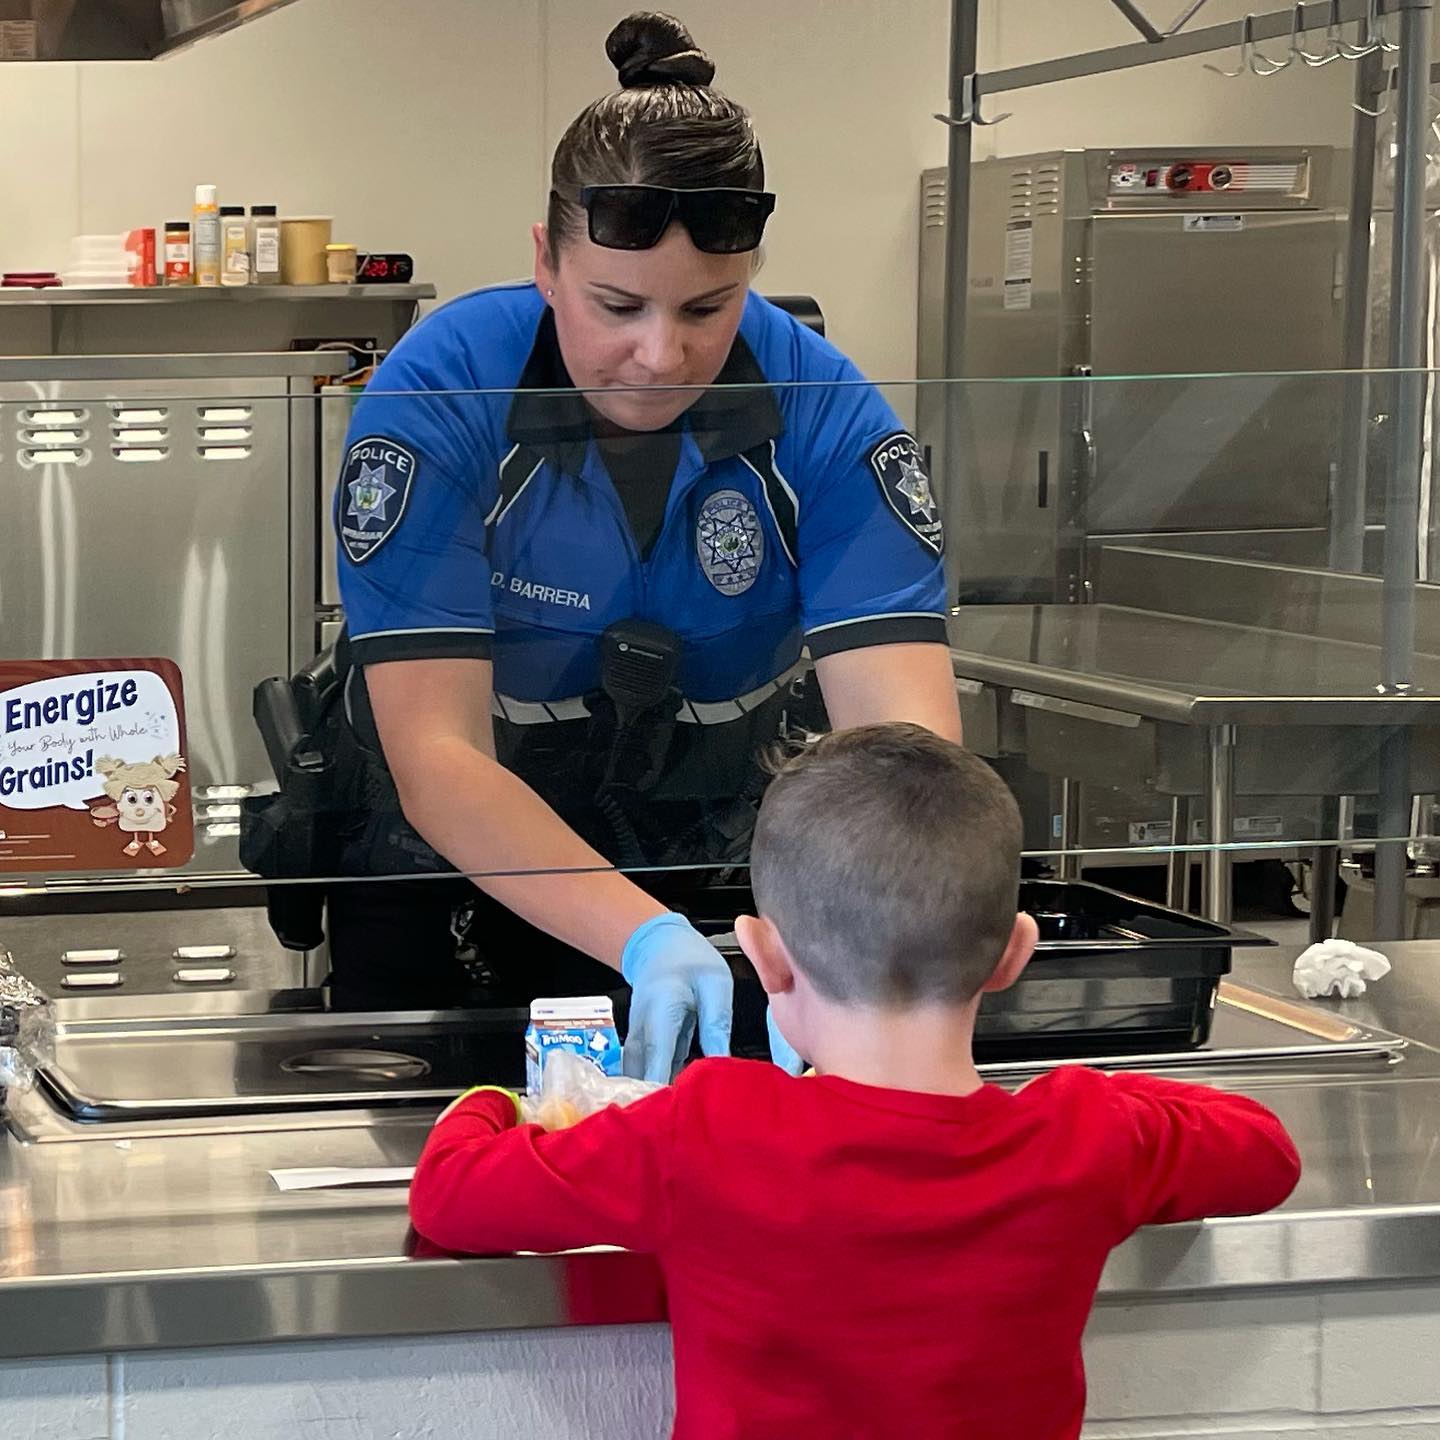 School Resource Officer passing out lunches at a school in Meridian